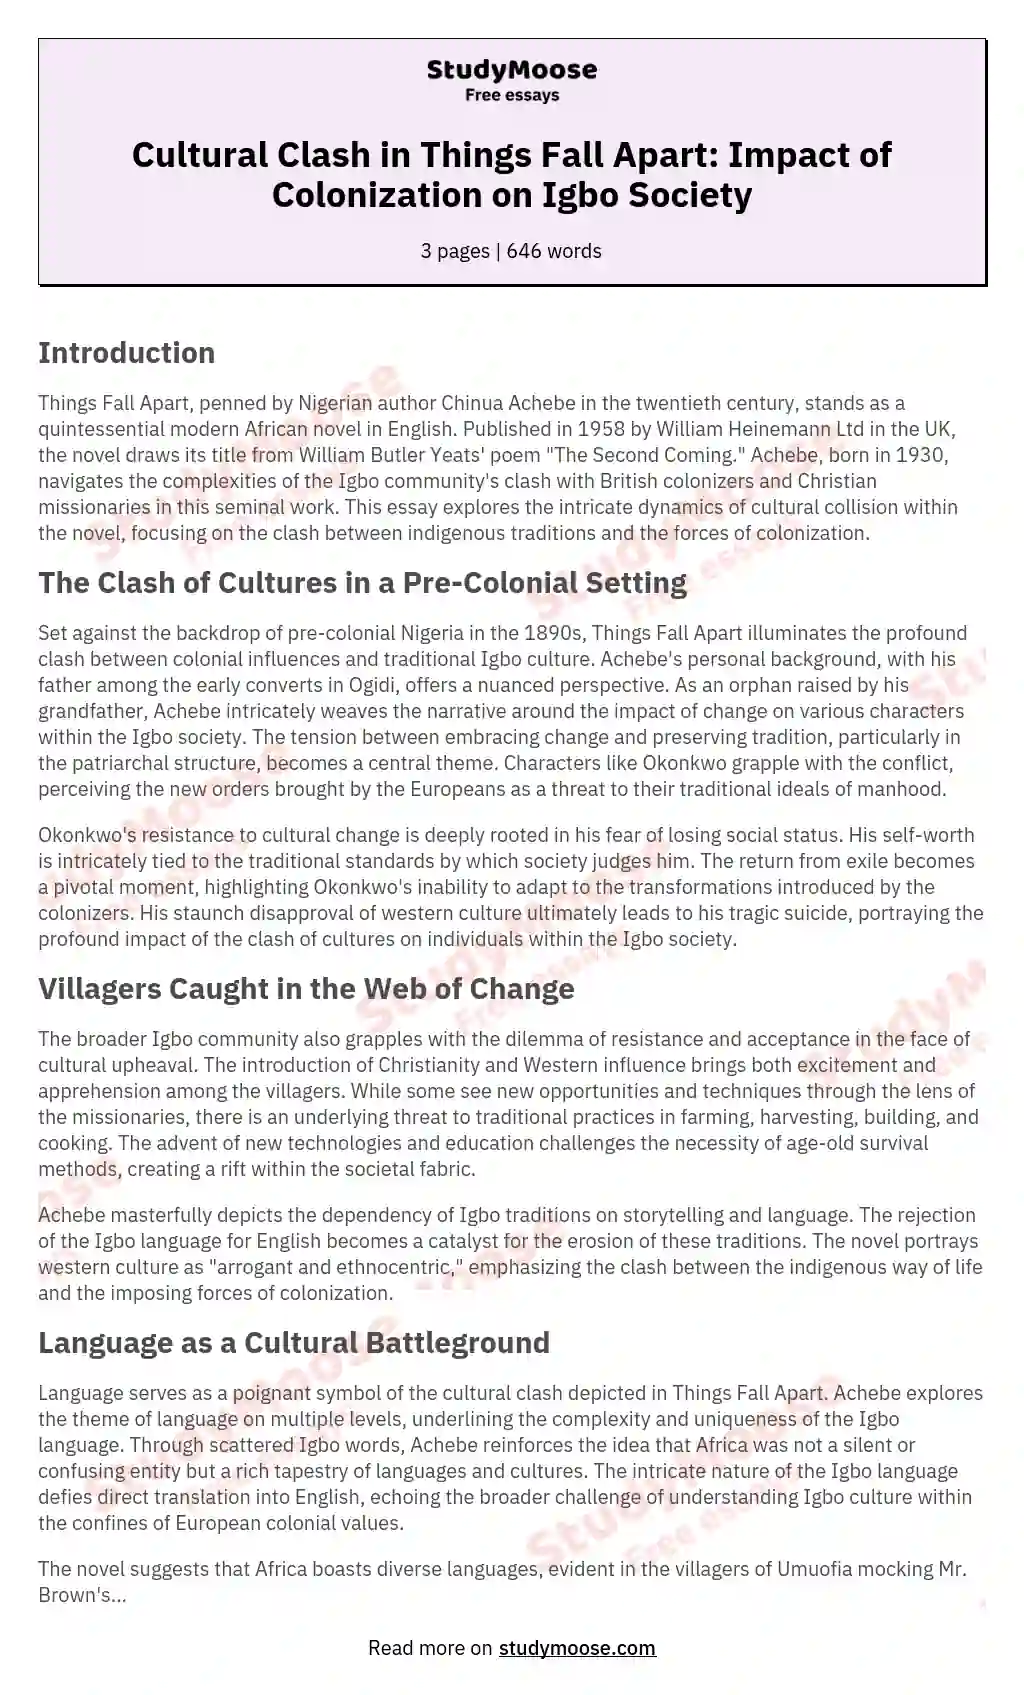 Cultural Clash in Things Fall Apart: Impact of Colonization on Igbo Society essay